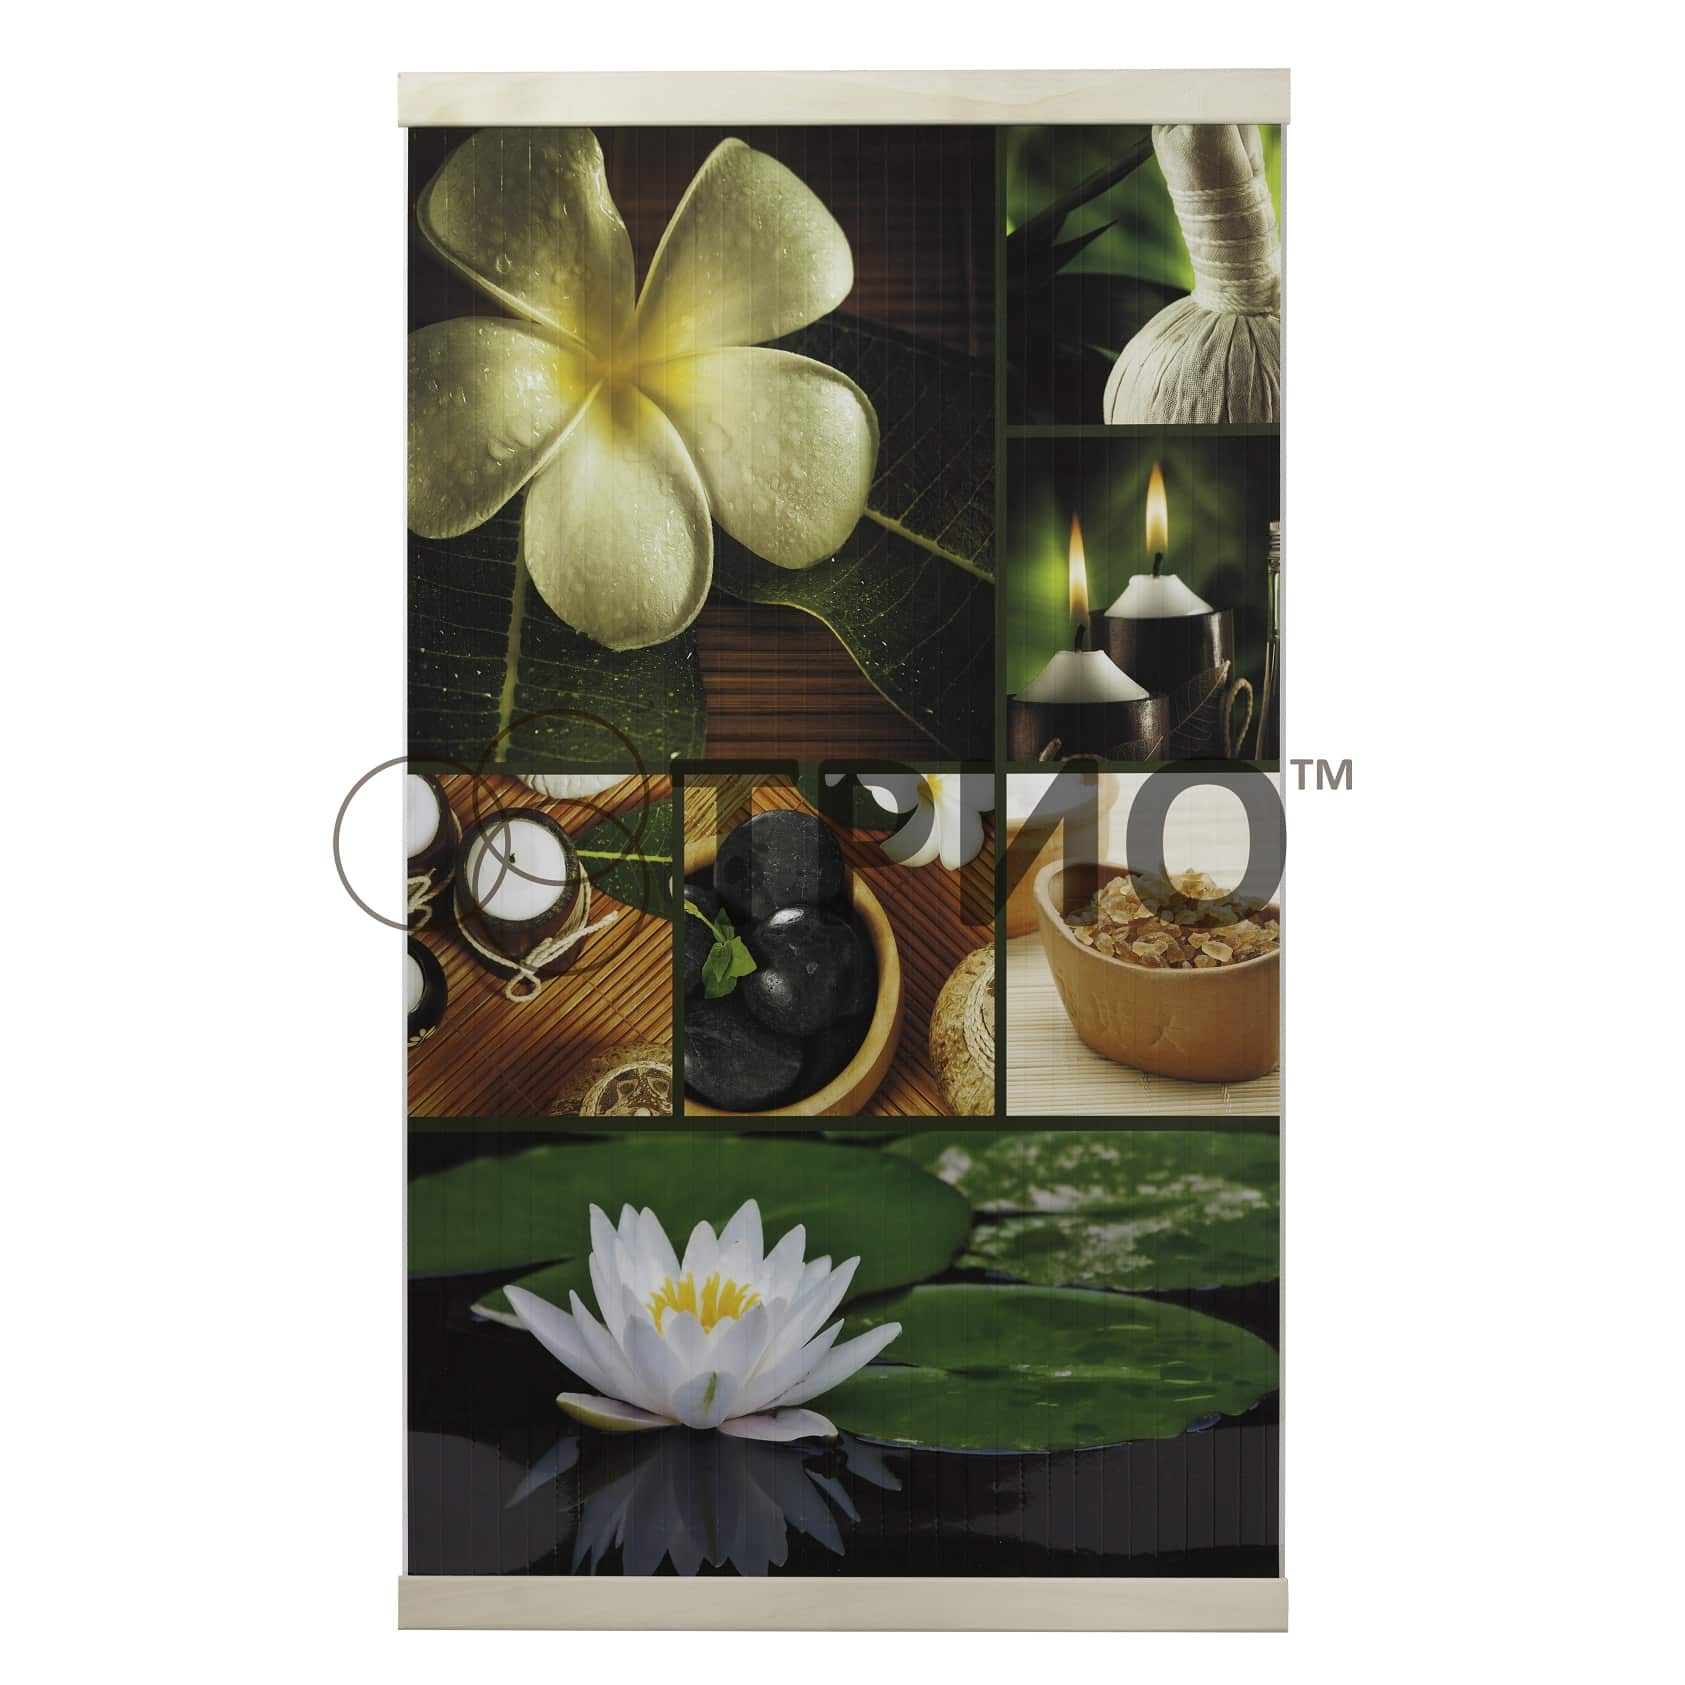 Infrared Wall mounted  Picture Heater. Far Infrared Heating Panel 420W "Lotus"